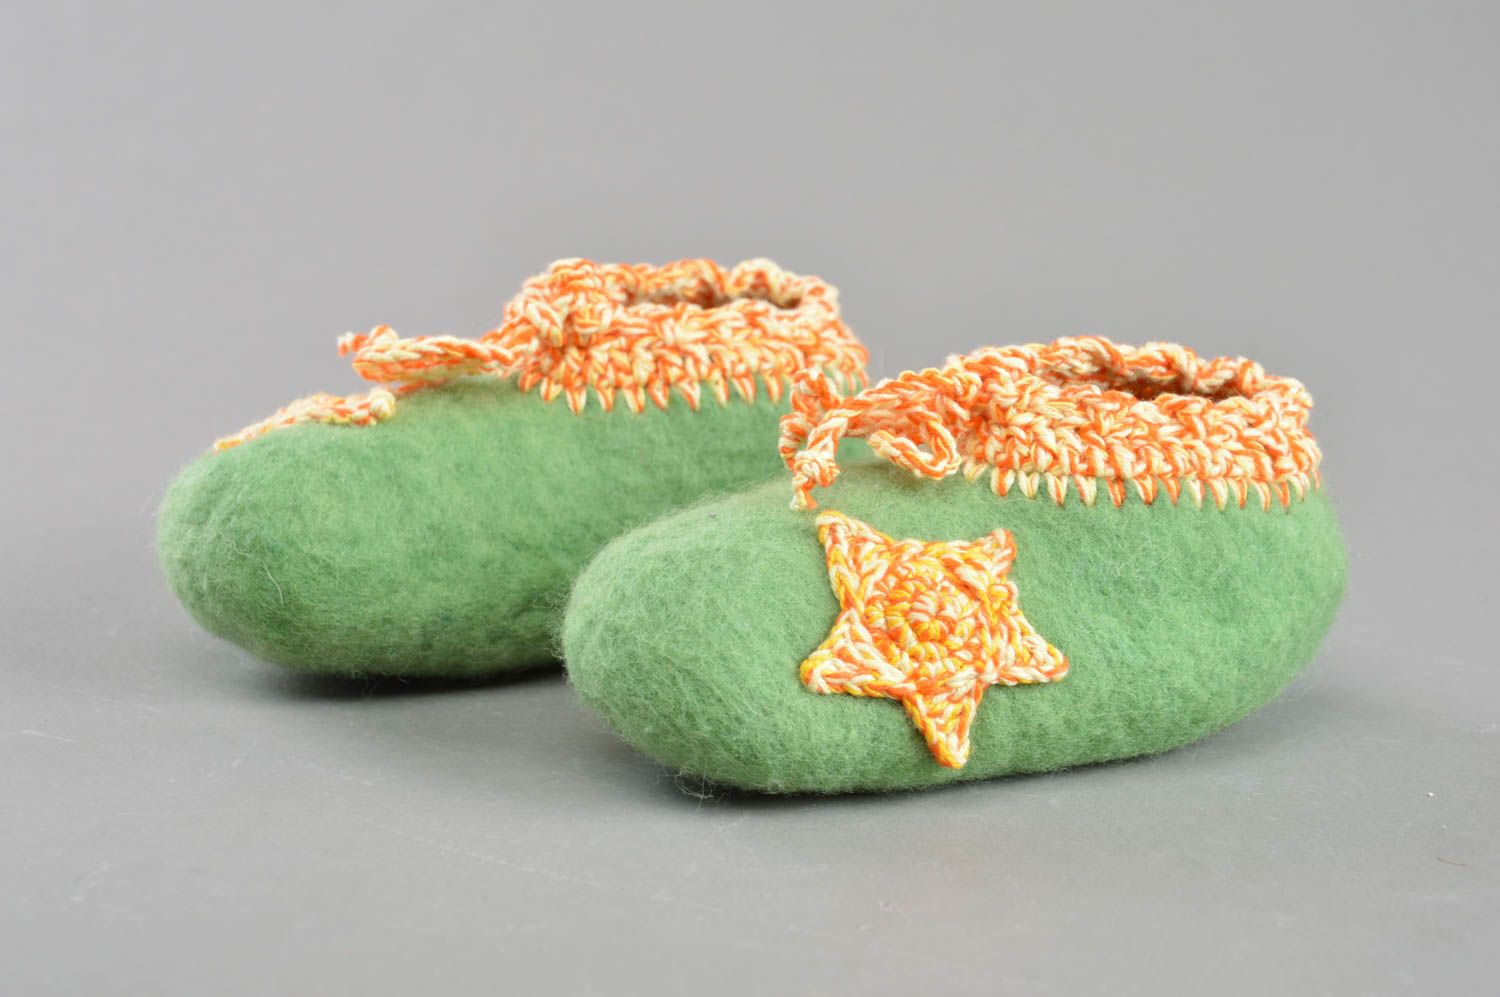 Handmade designer felted wool light green baby booties with crocheted edges photo 2